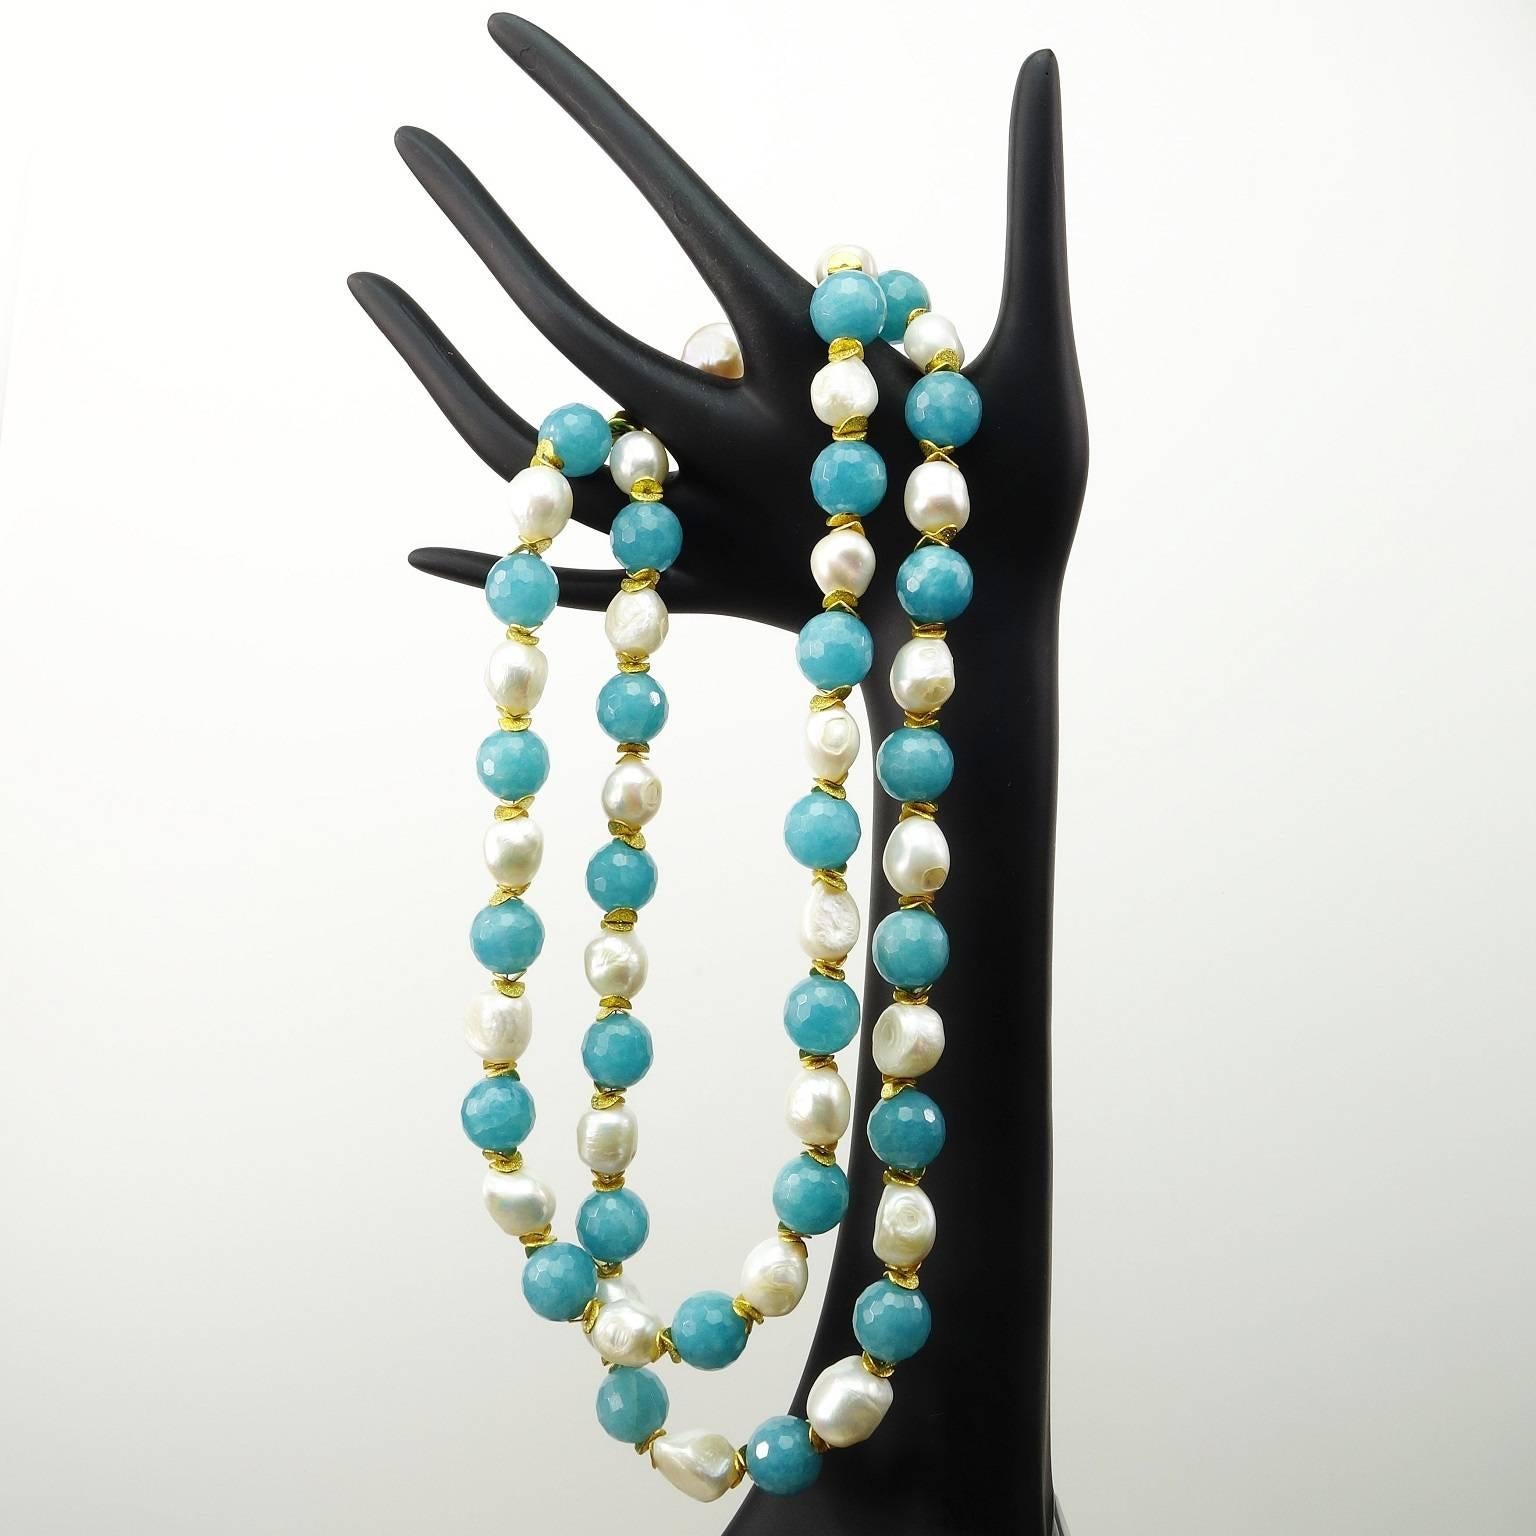 Women's or Men's Double Strand Turquoise Agate and Pearls Necklace